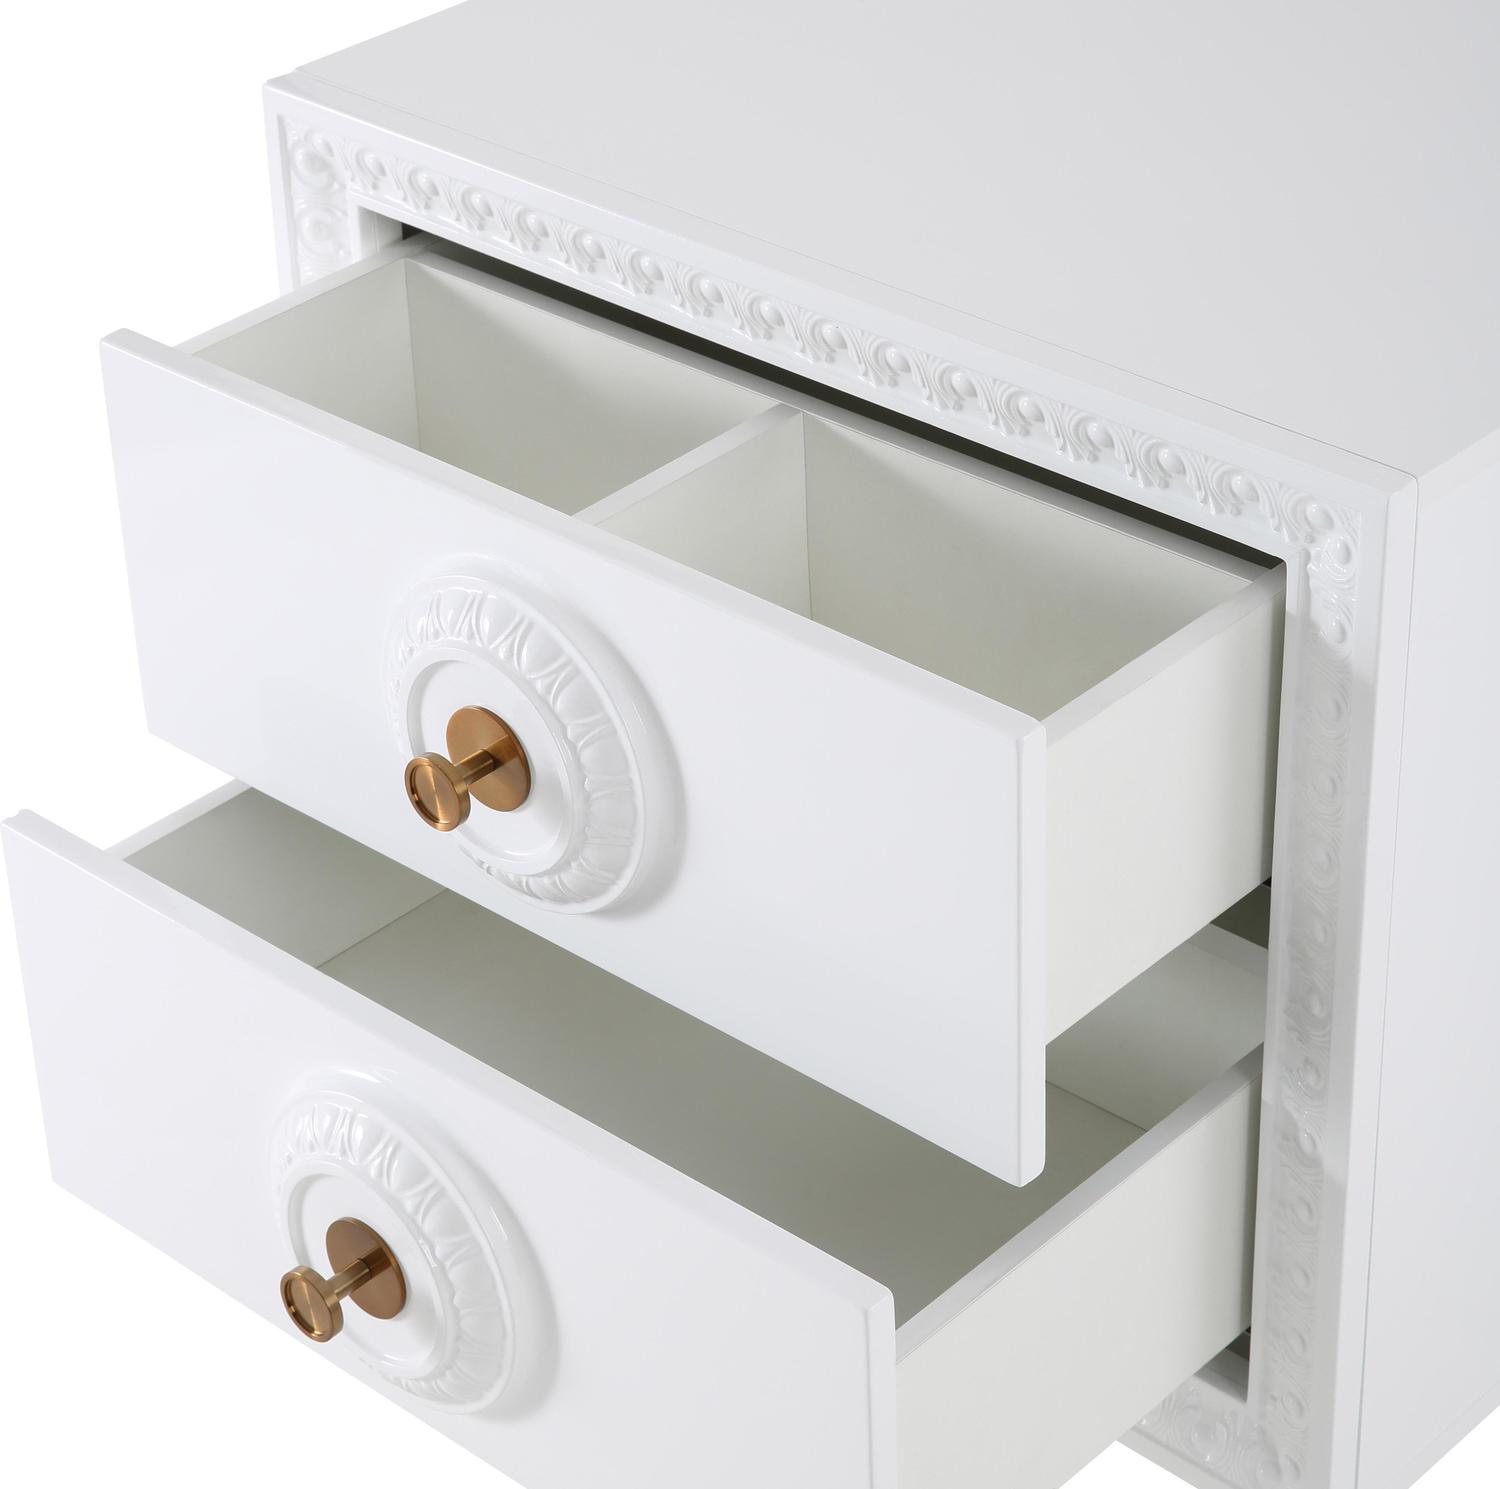 contemporary accent tables Tov Furniture Nightstands White